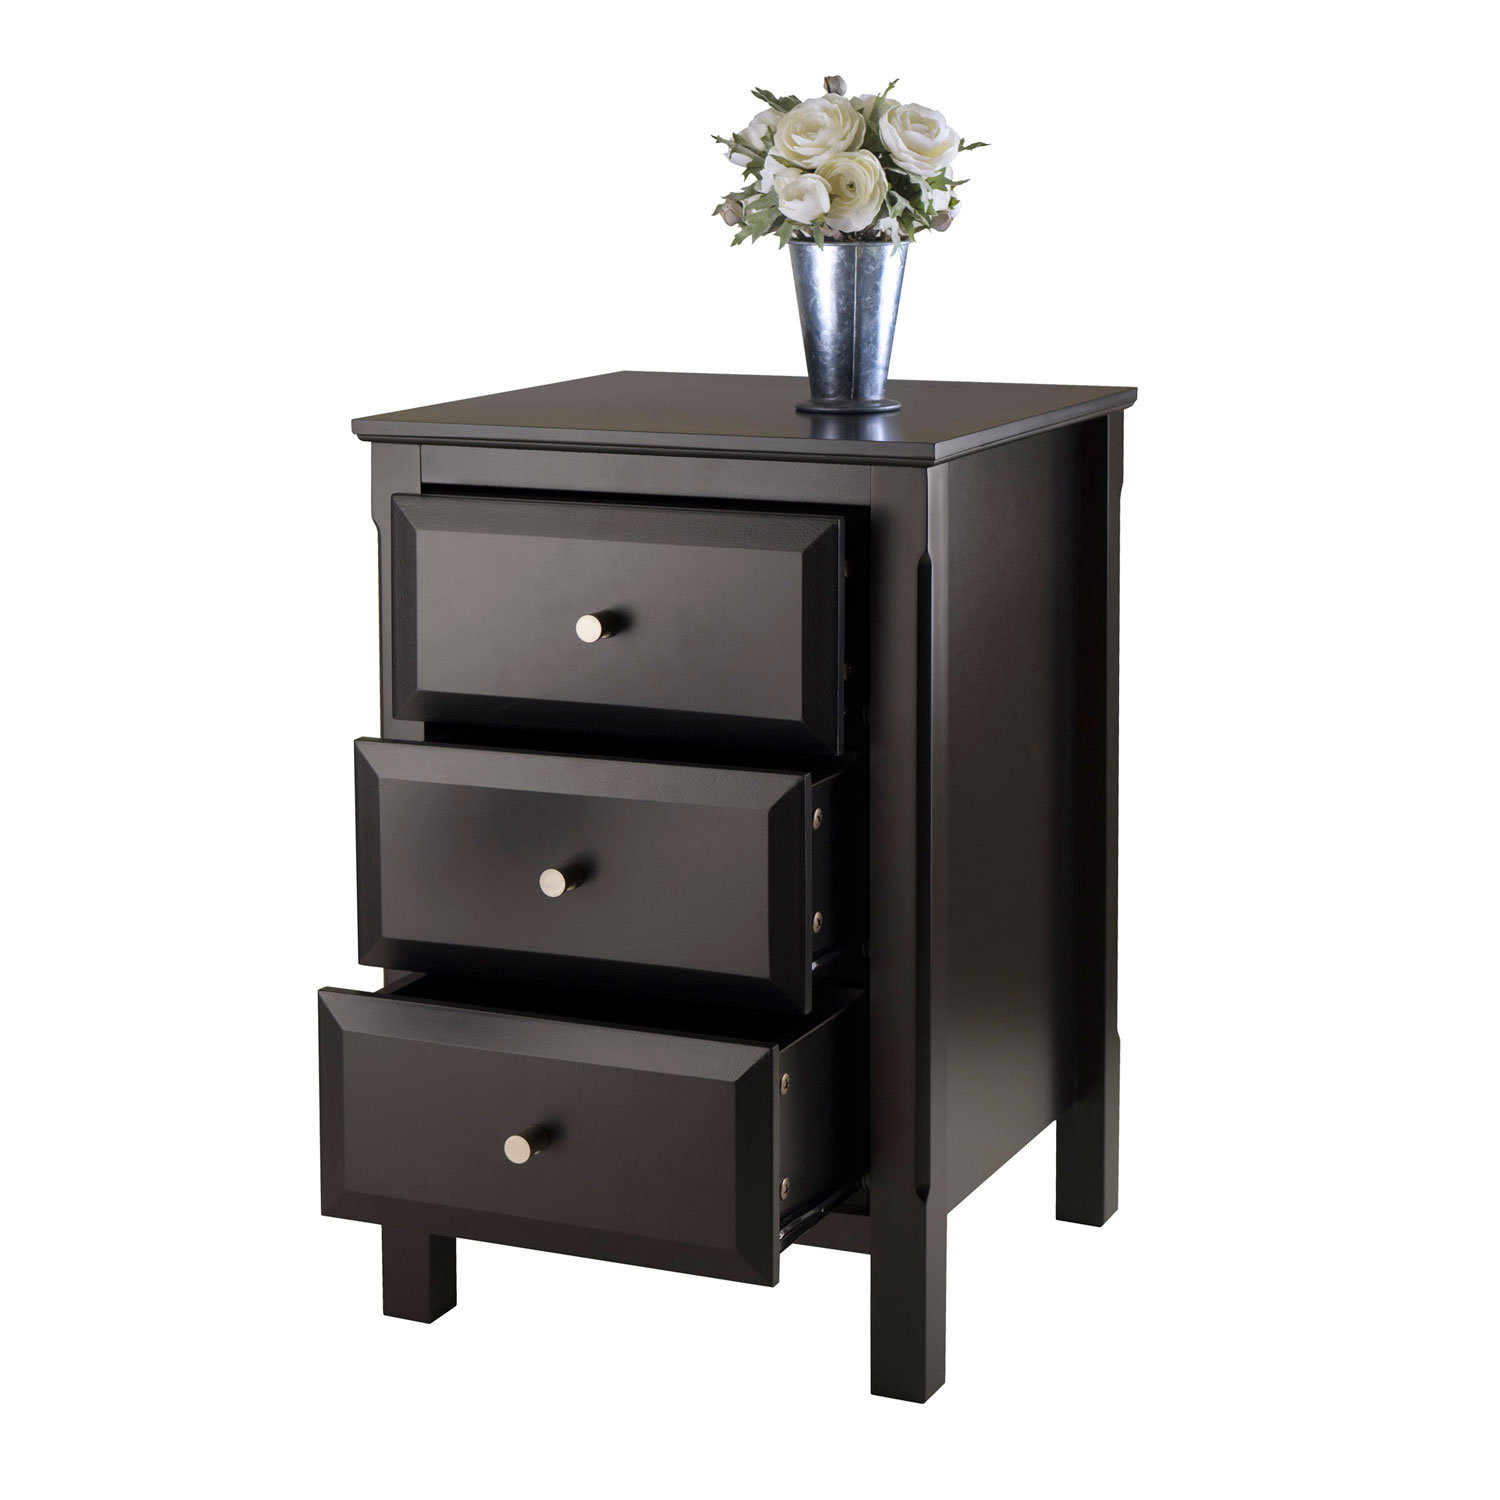 winsome wood timmy accent table black bellacor hover zoom brown leather ott pier one decor verizon tablet inch wide sofa vanity unit with basin coffee glass white dark oak side